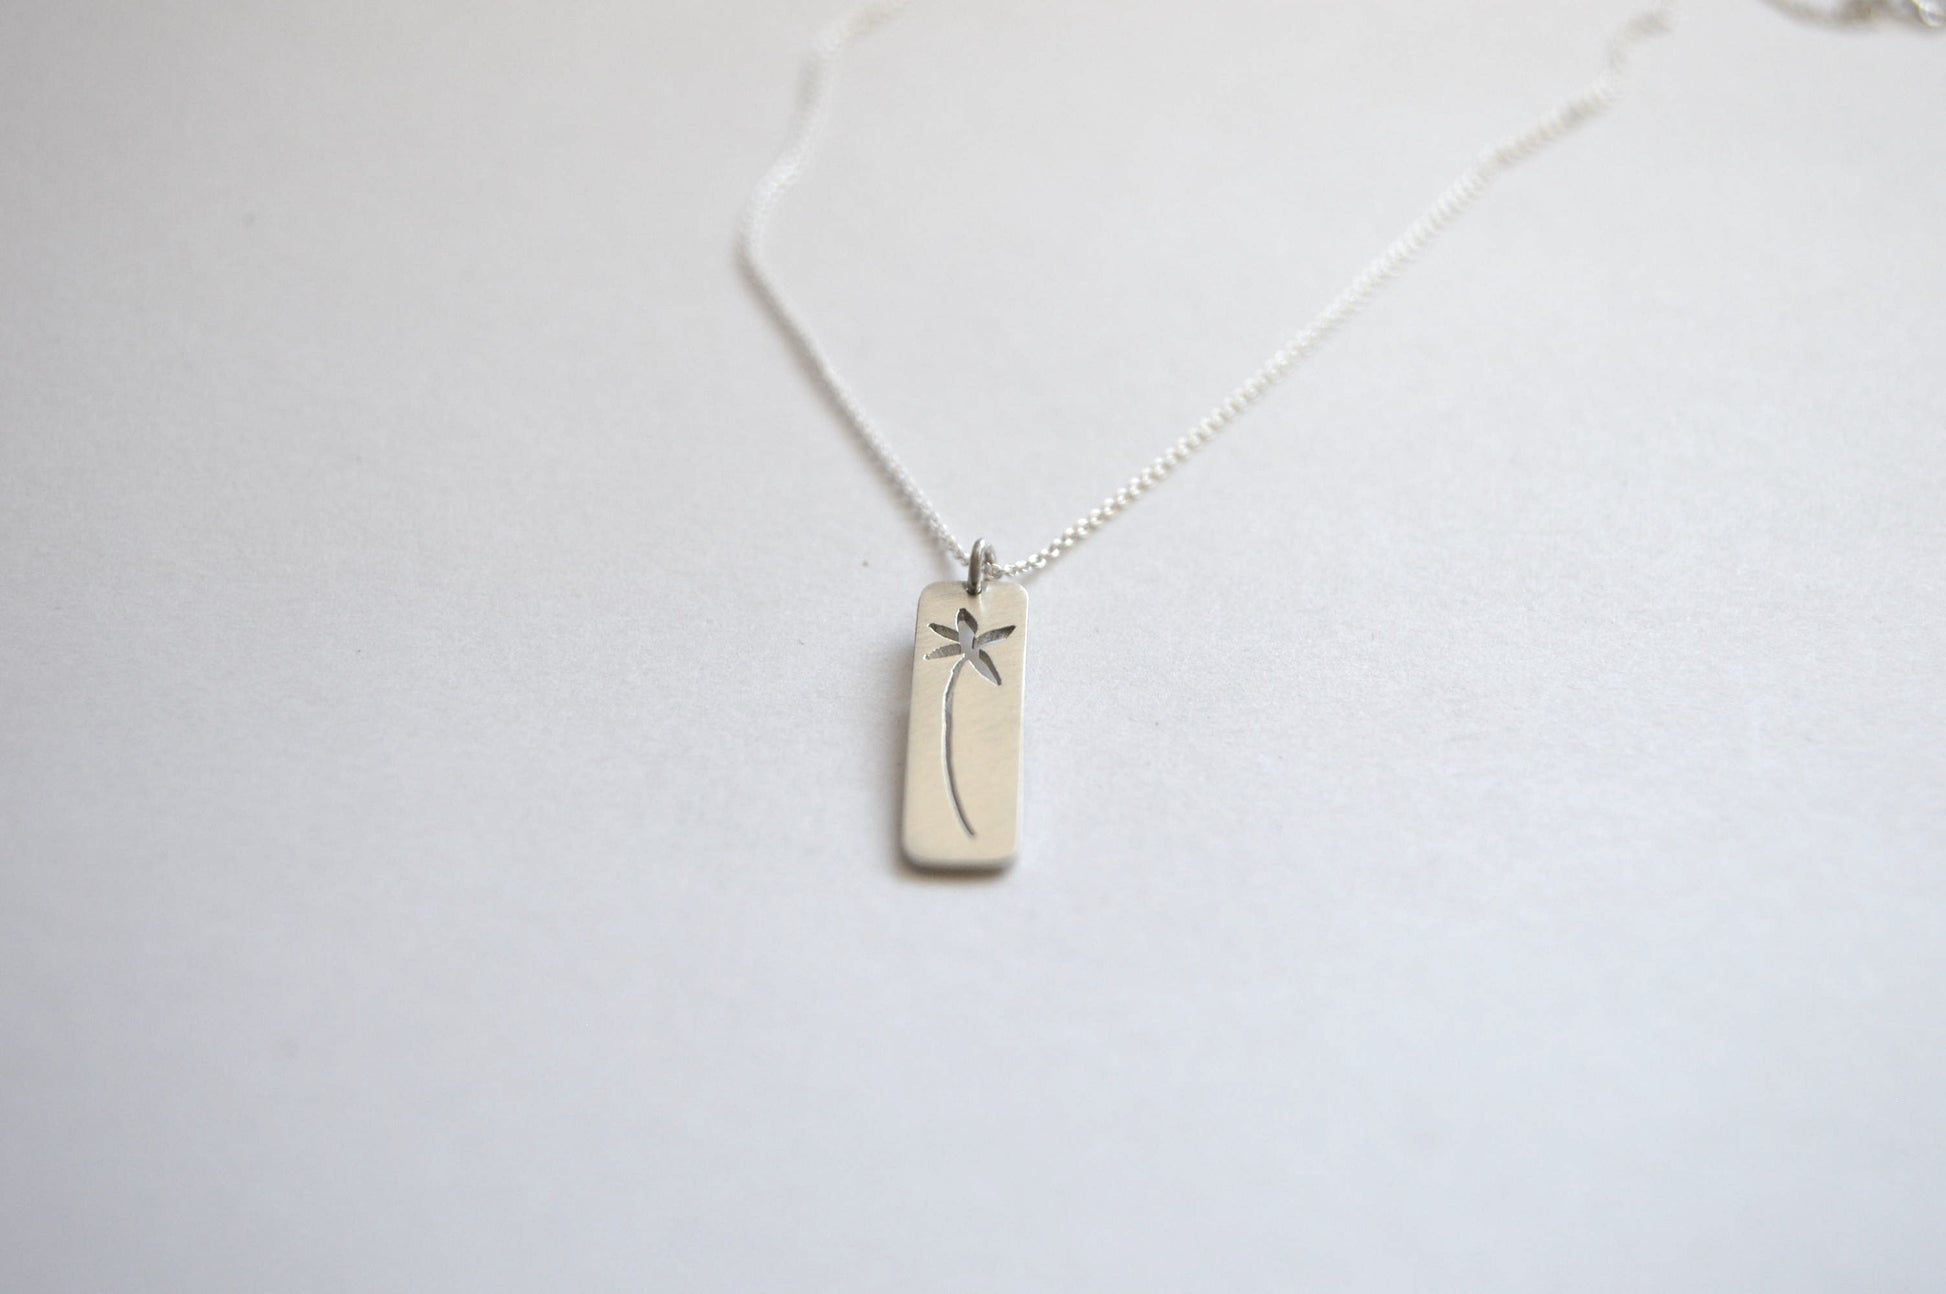  Botanical Collection Pendant with Botanical cut-out inspired by a Buchu Flower